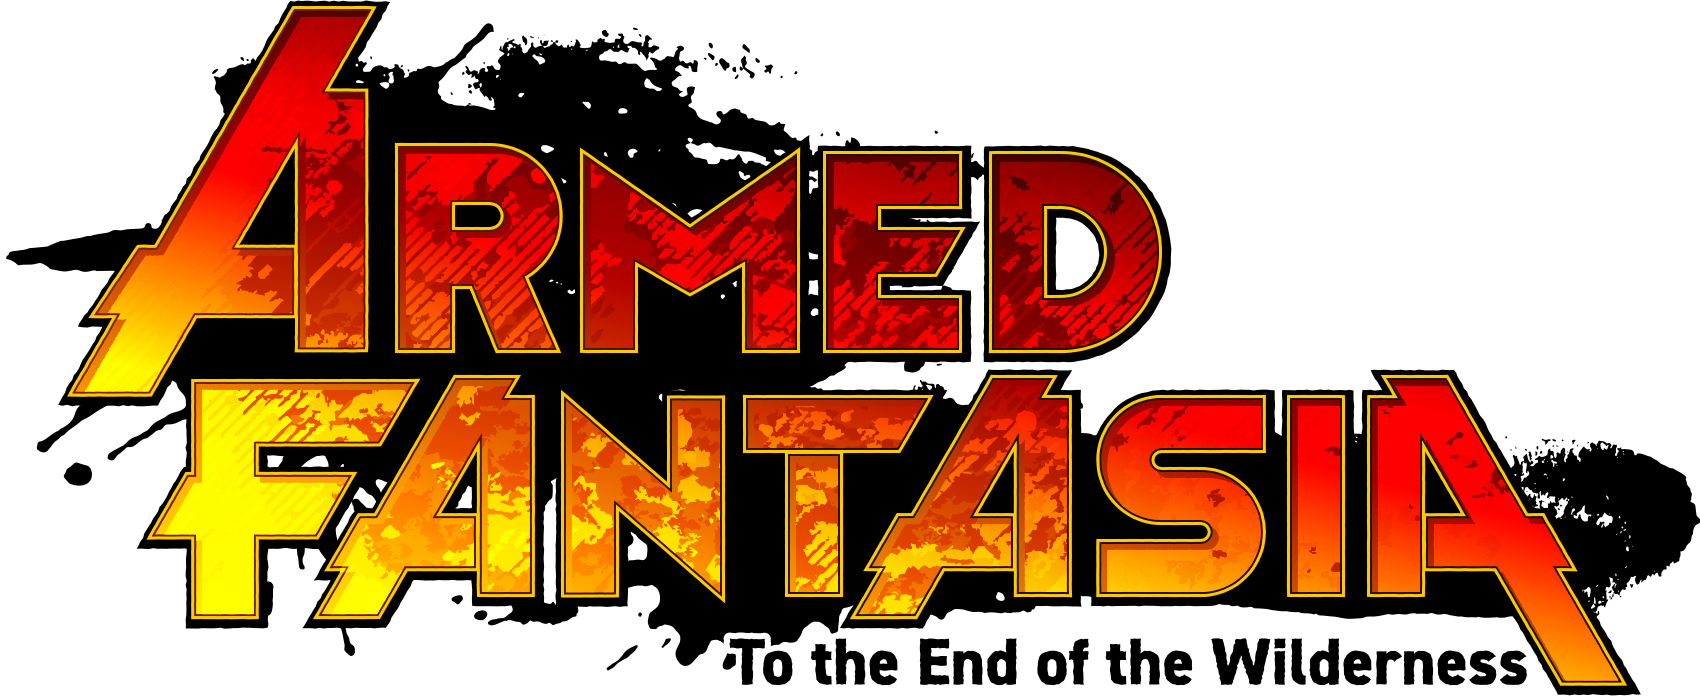 Armed Fantasia, Penny Blood Games Reveal More Staff - News